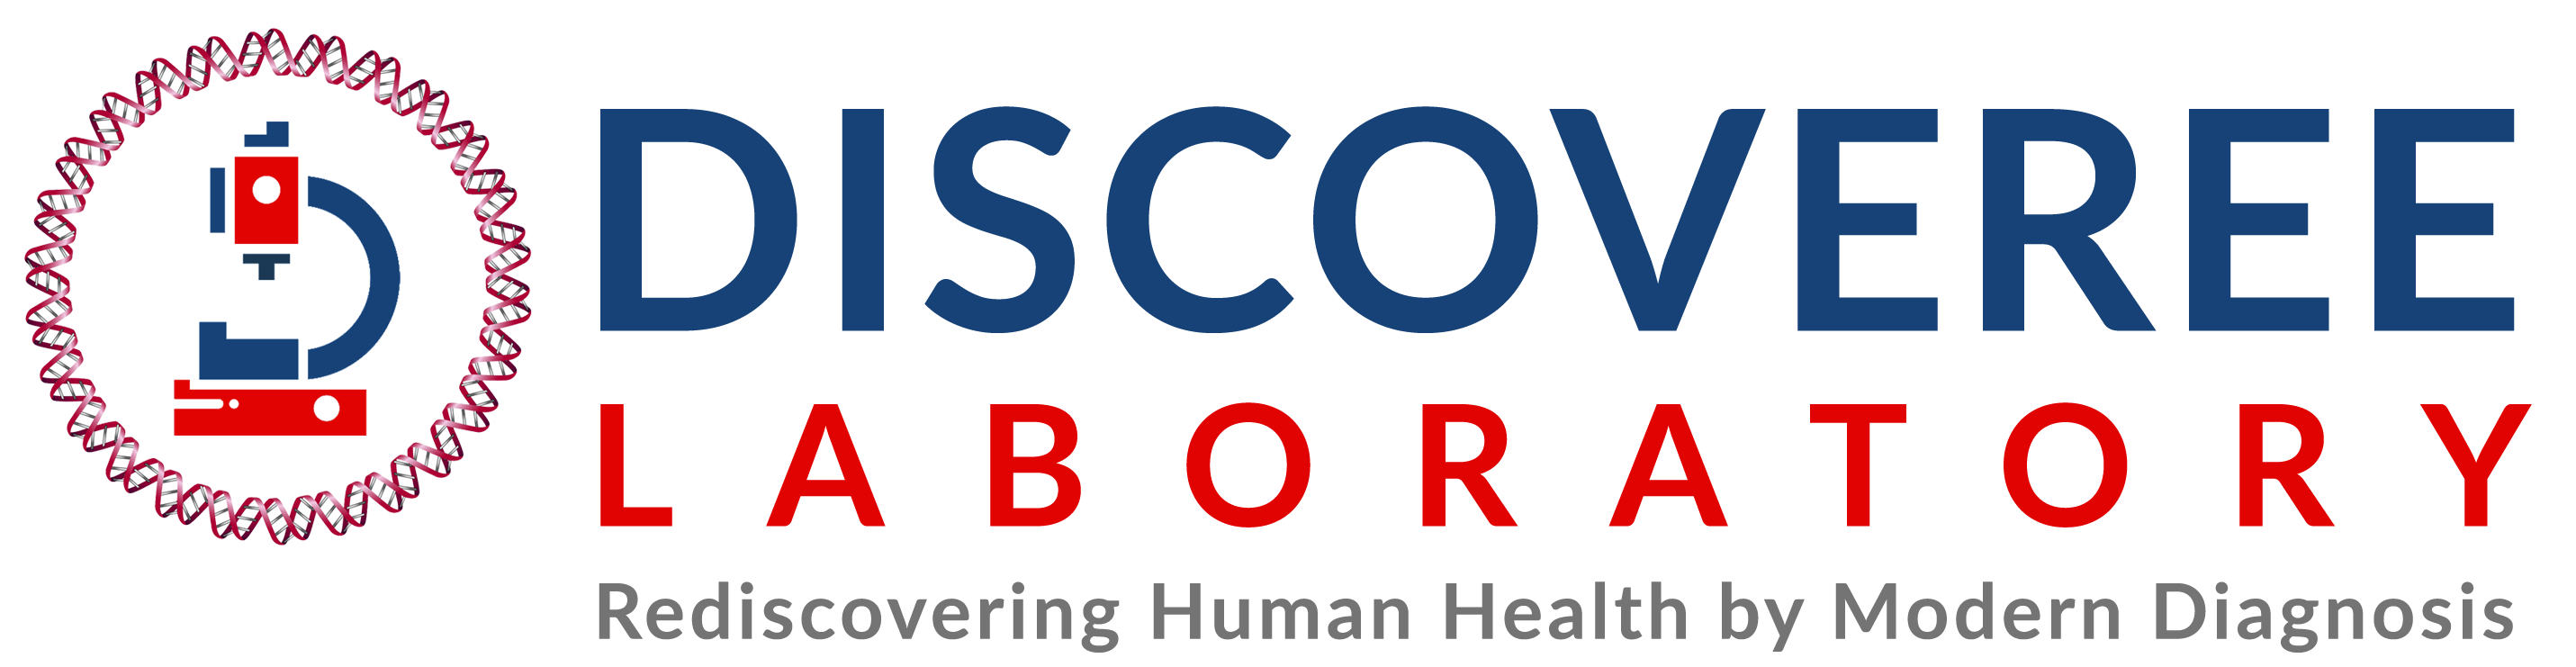 Discoveree laboratory|Veterinary|Medical Services